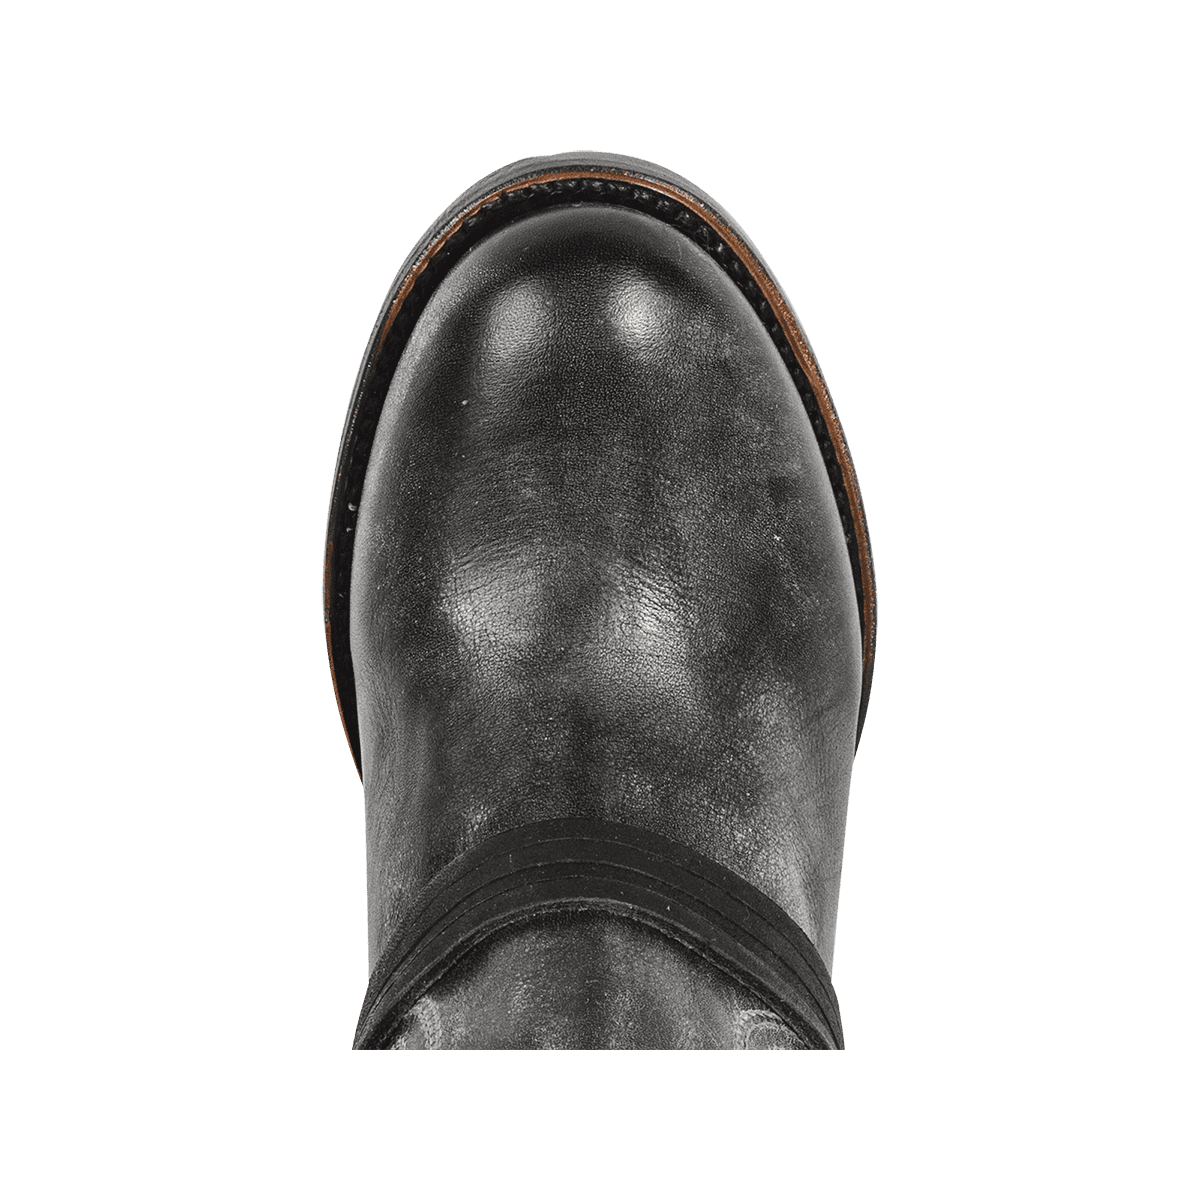 Top view showing round toe and leather ankle lacing on FREEBIRD women's Coal black tall boot